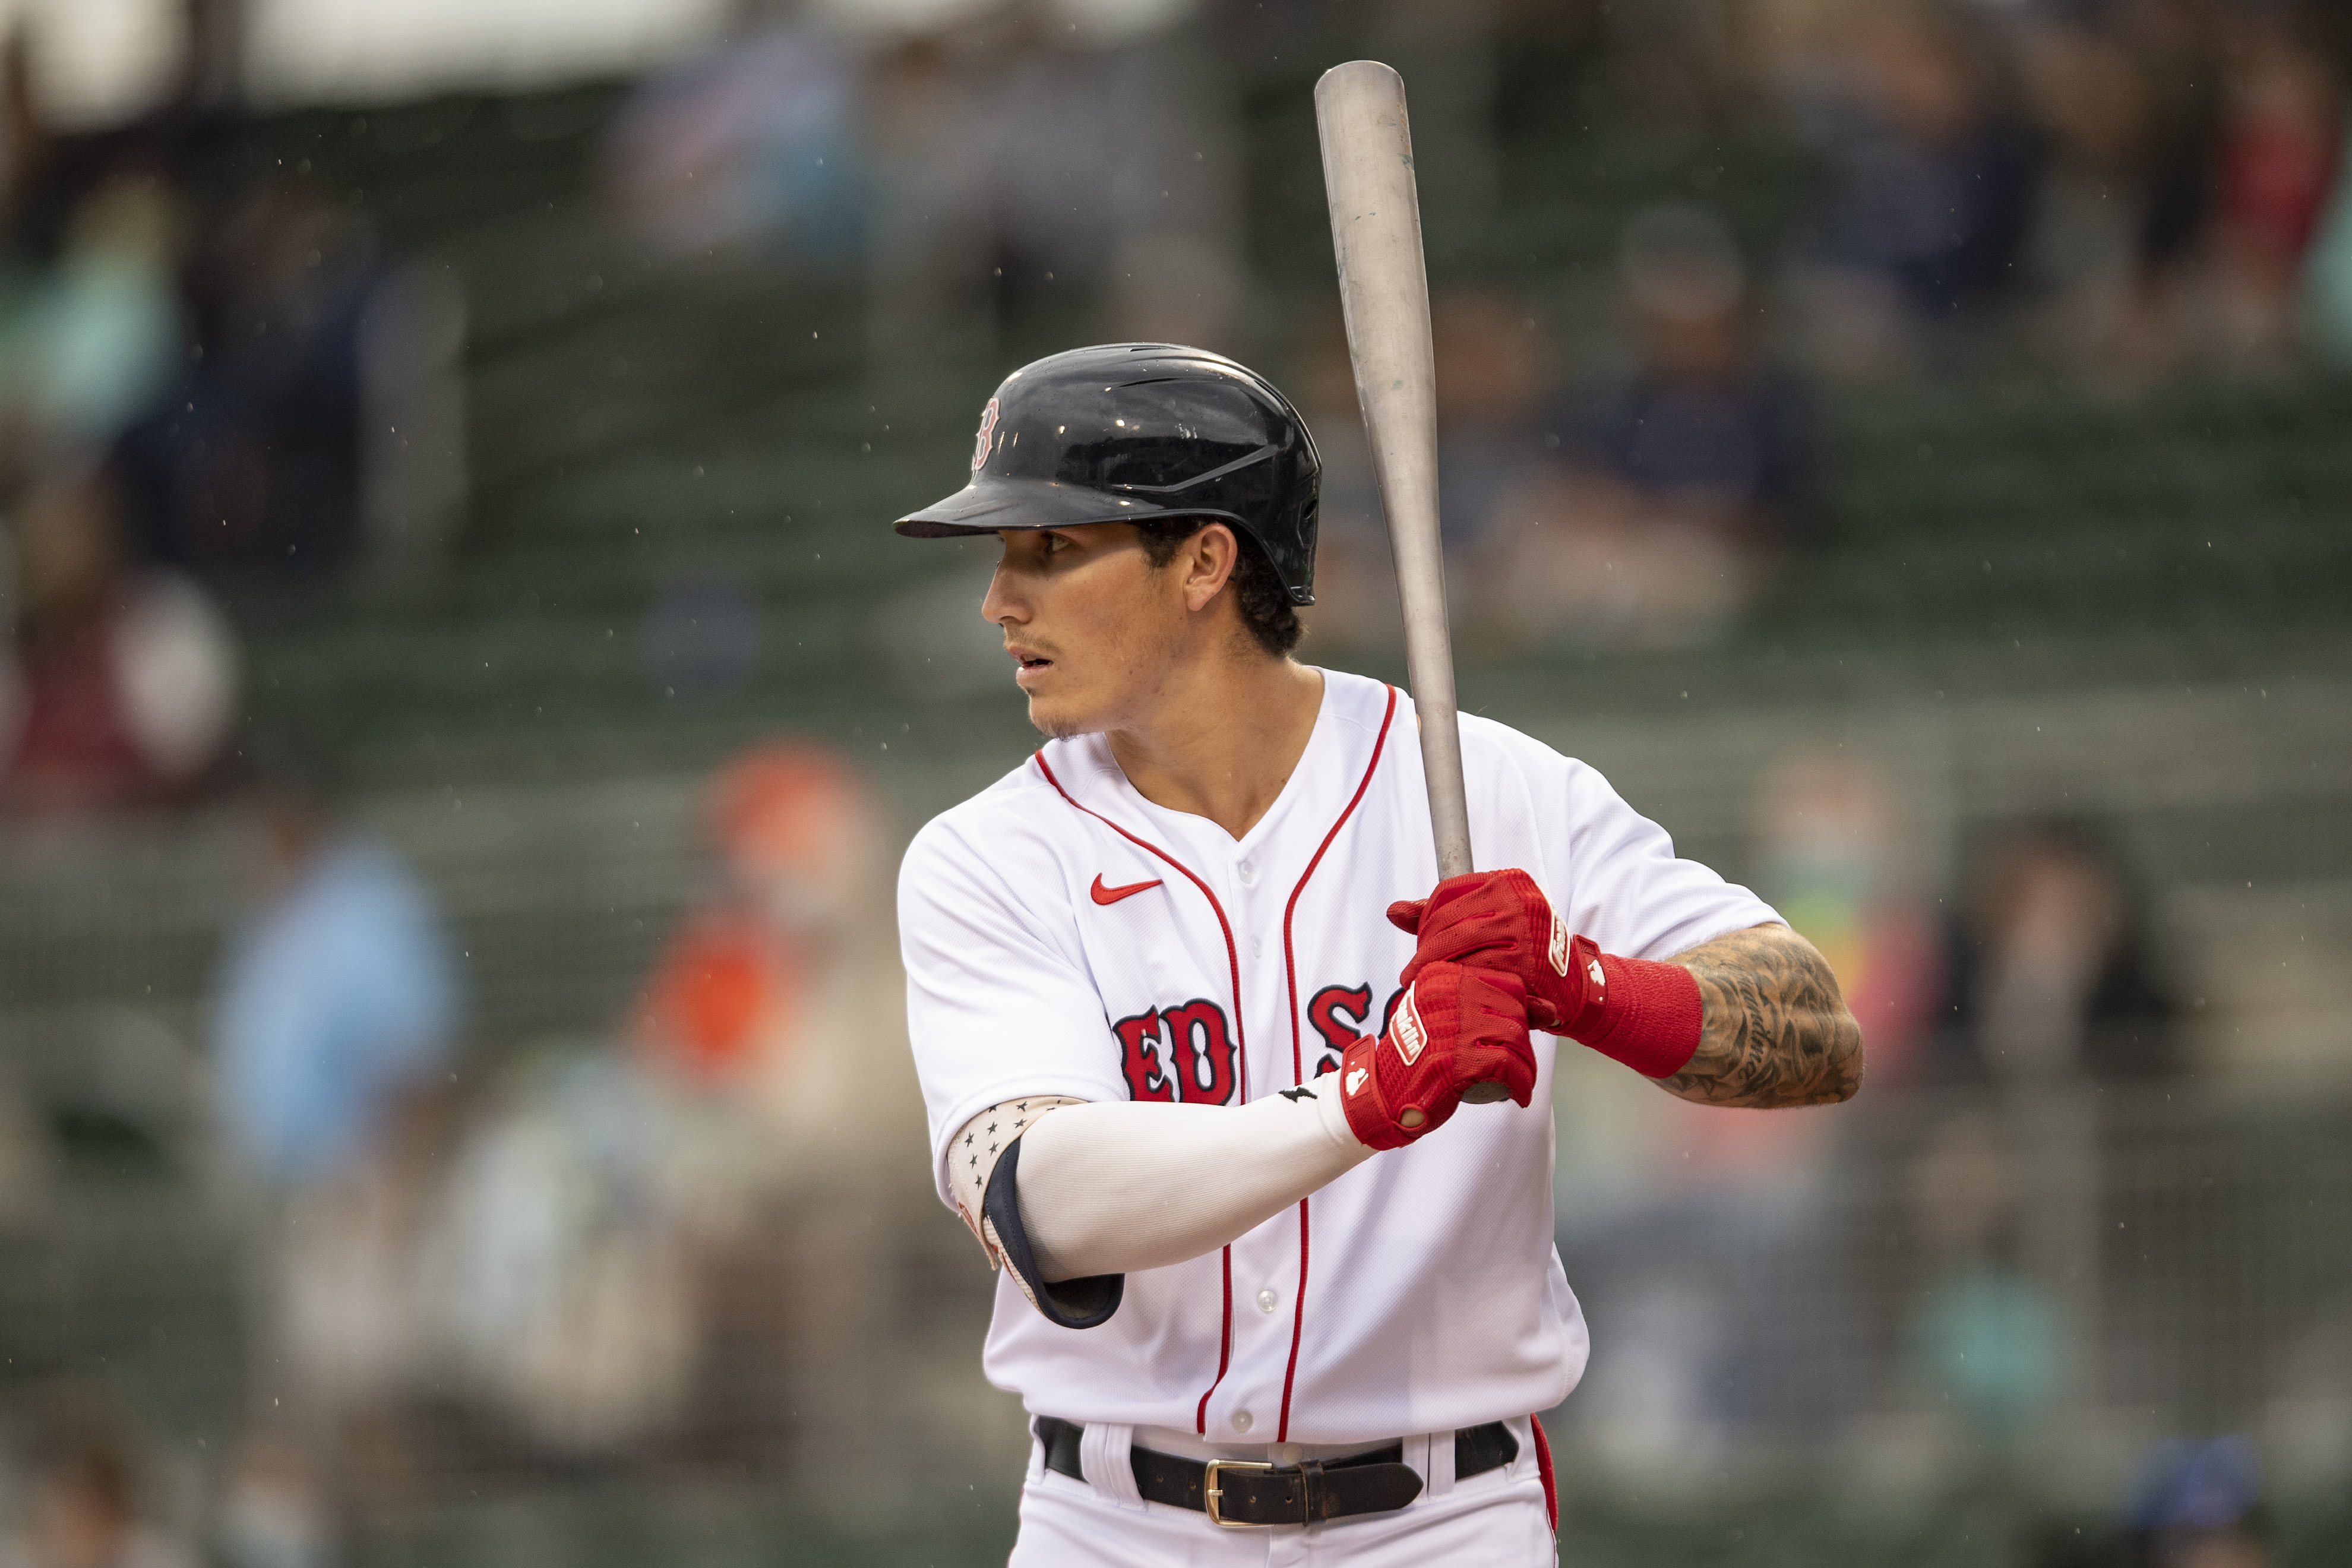 Boston Red Sox 2019: Scouting, Projected Lineup, Season Prediction